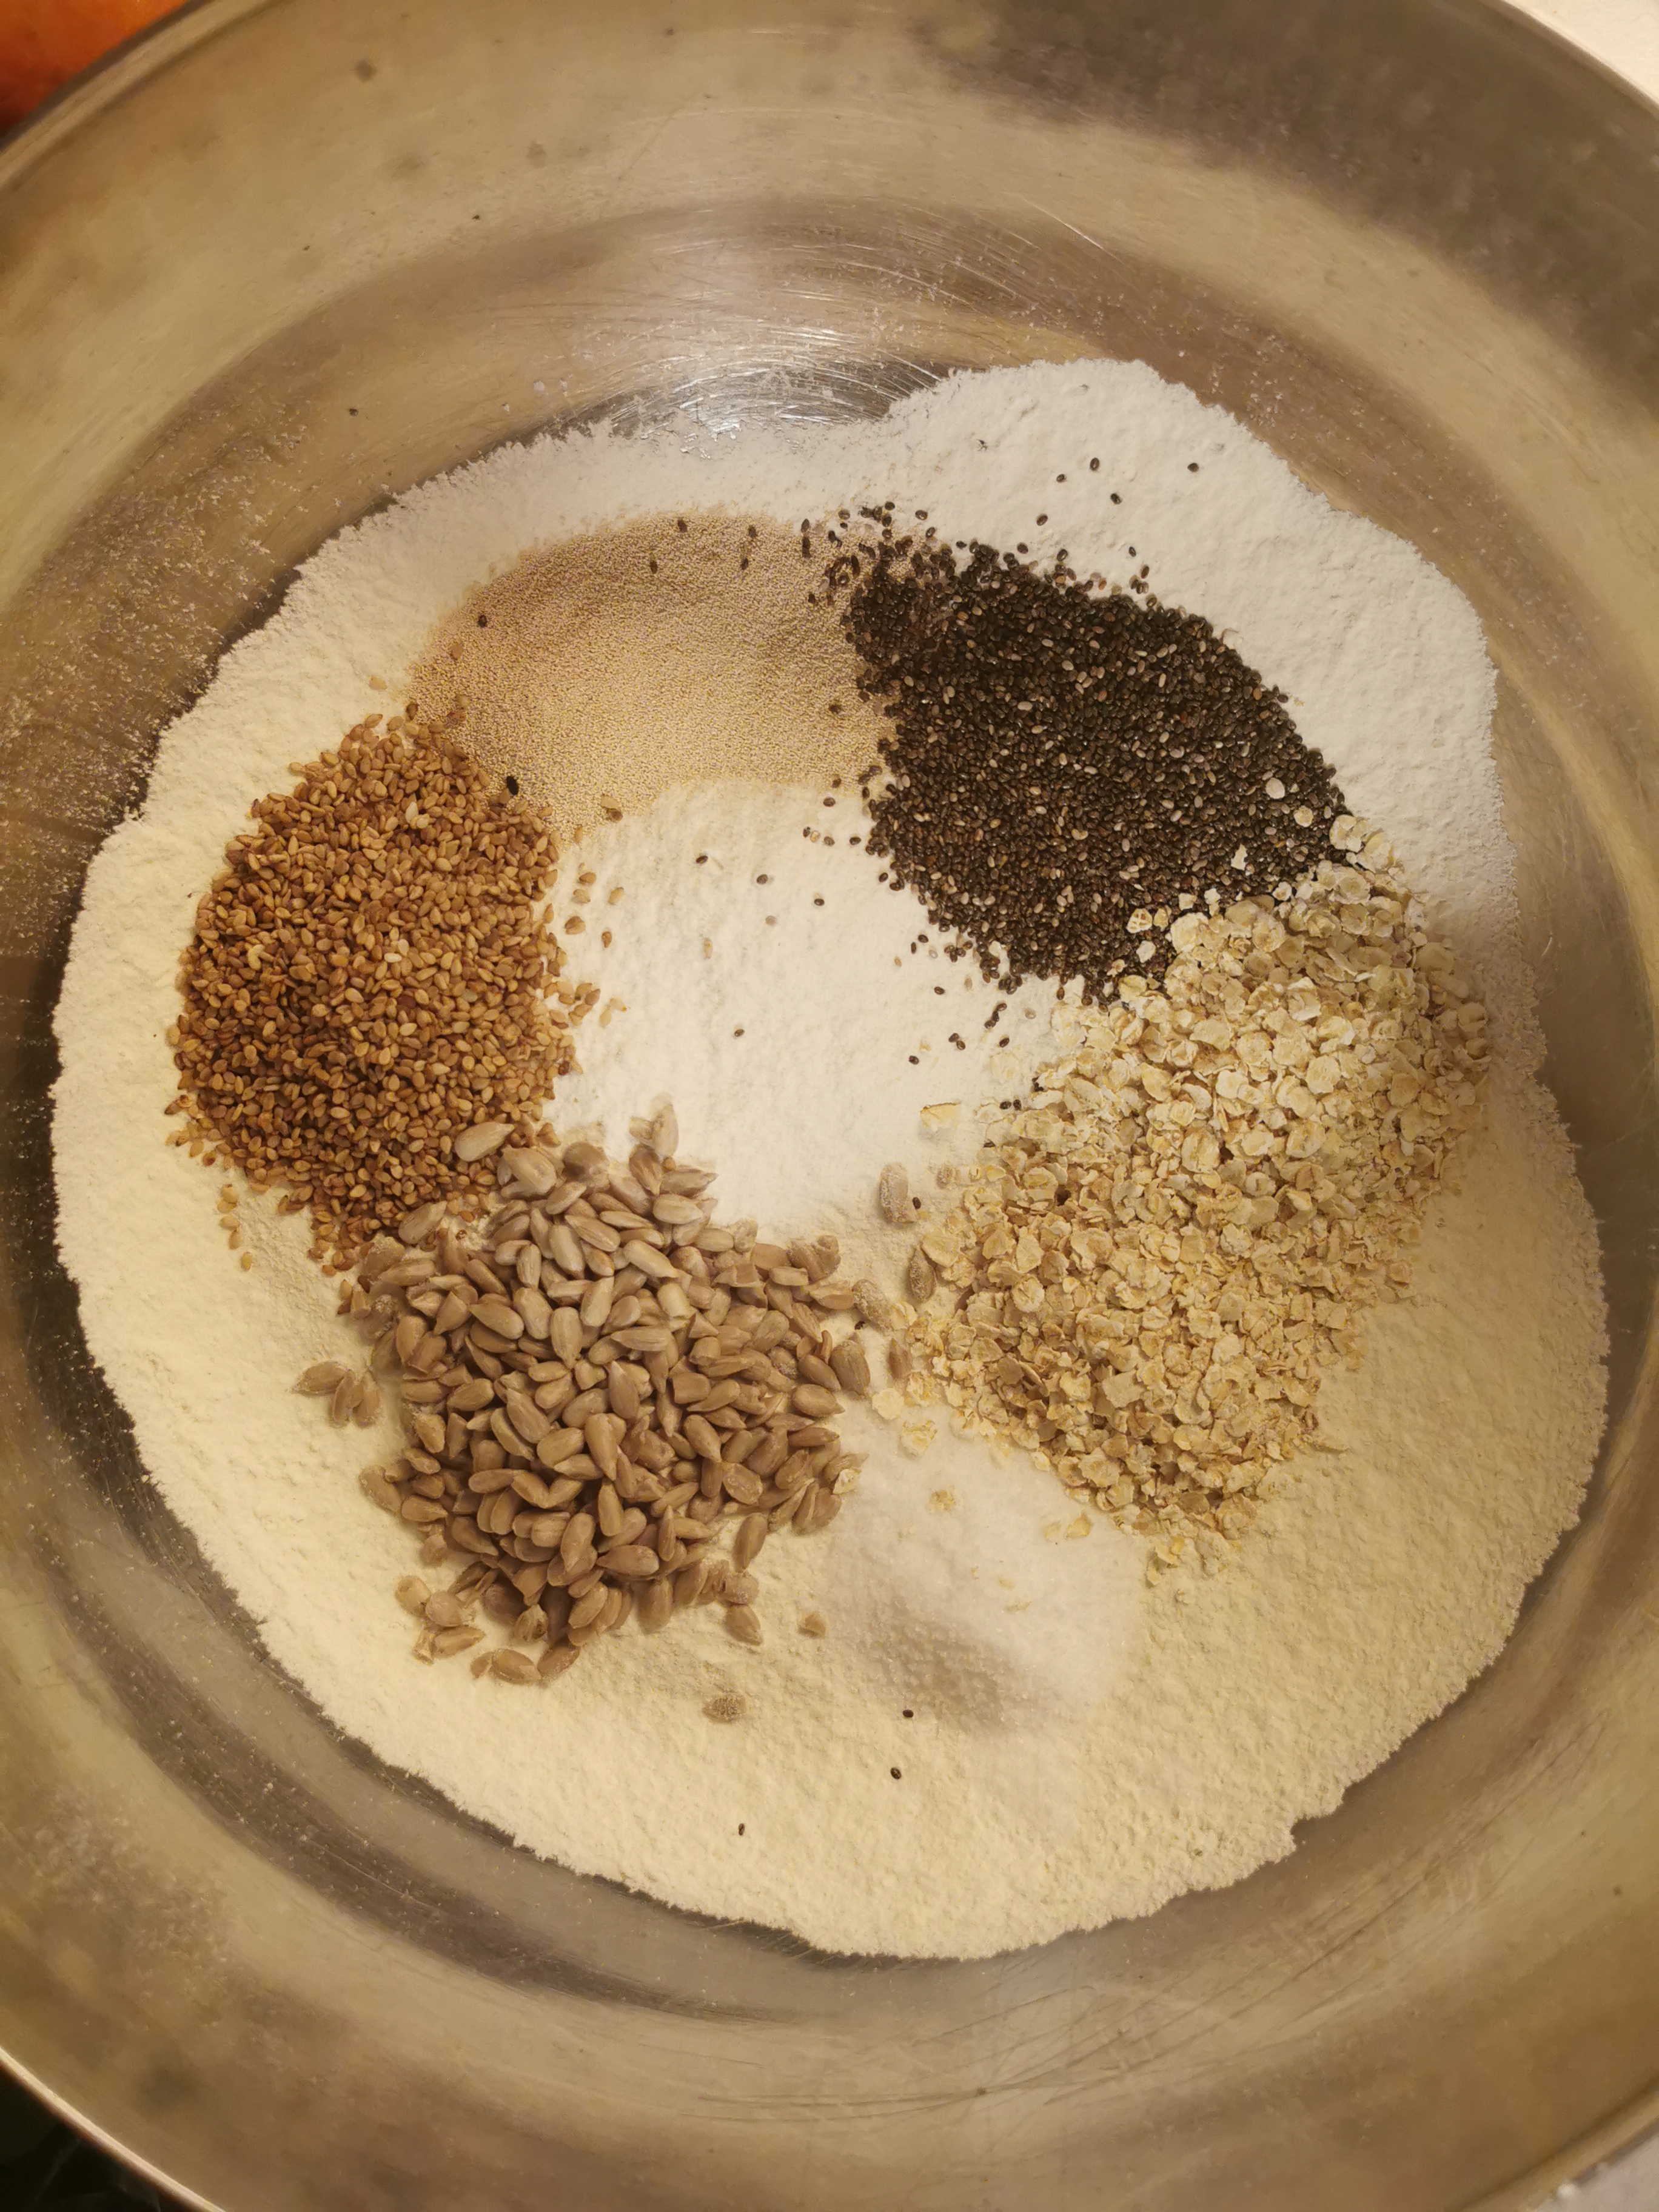 Pre-mixed dry ingredients